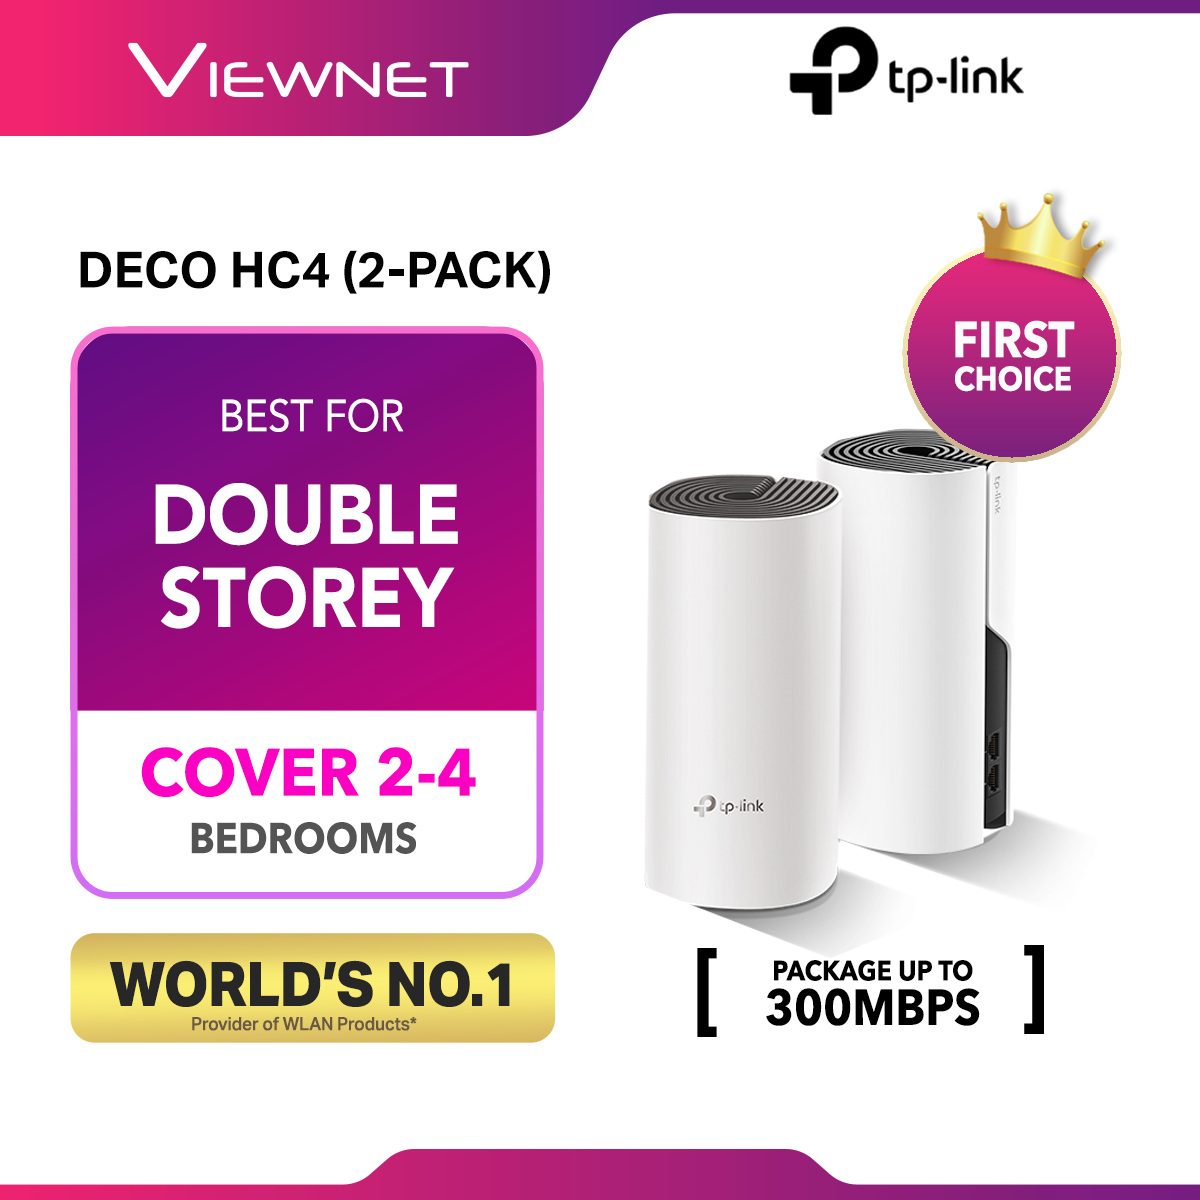 TP-Link Deco HC4 ( 2 packs ) AC1200 Whole Home WiFi mesh Wi-Fi System SUPPORT UNIFI, MAXIS, CELCOM , TIME & HyppTV